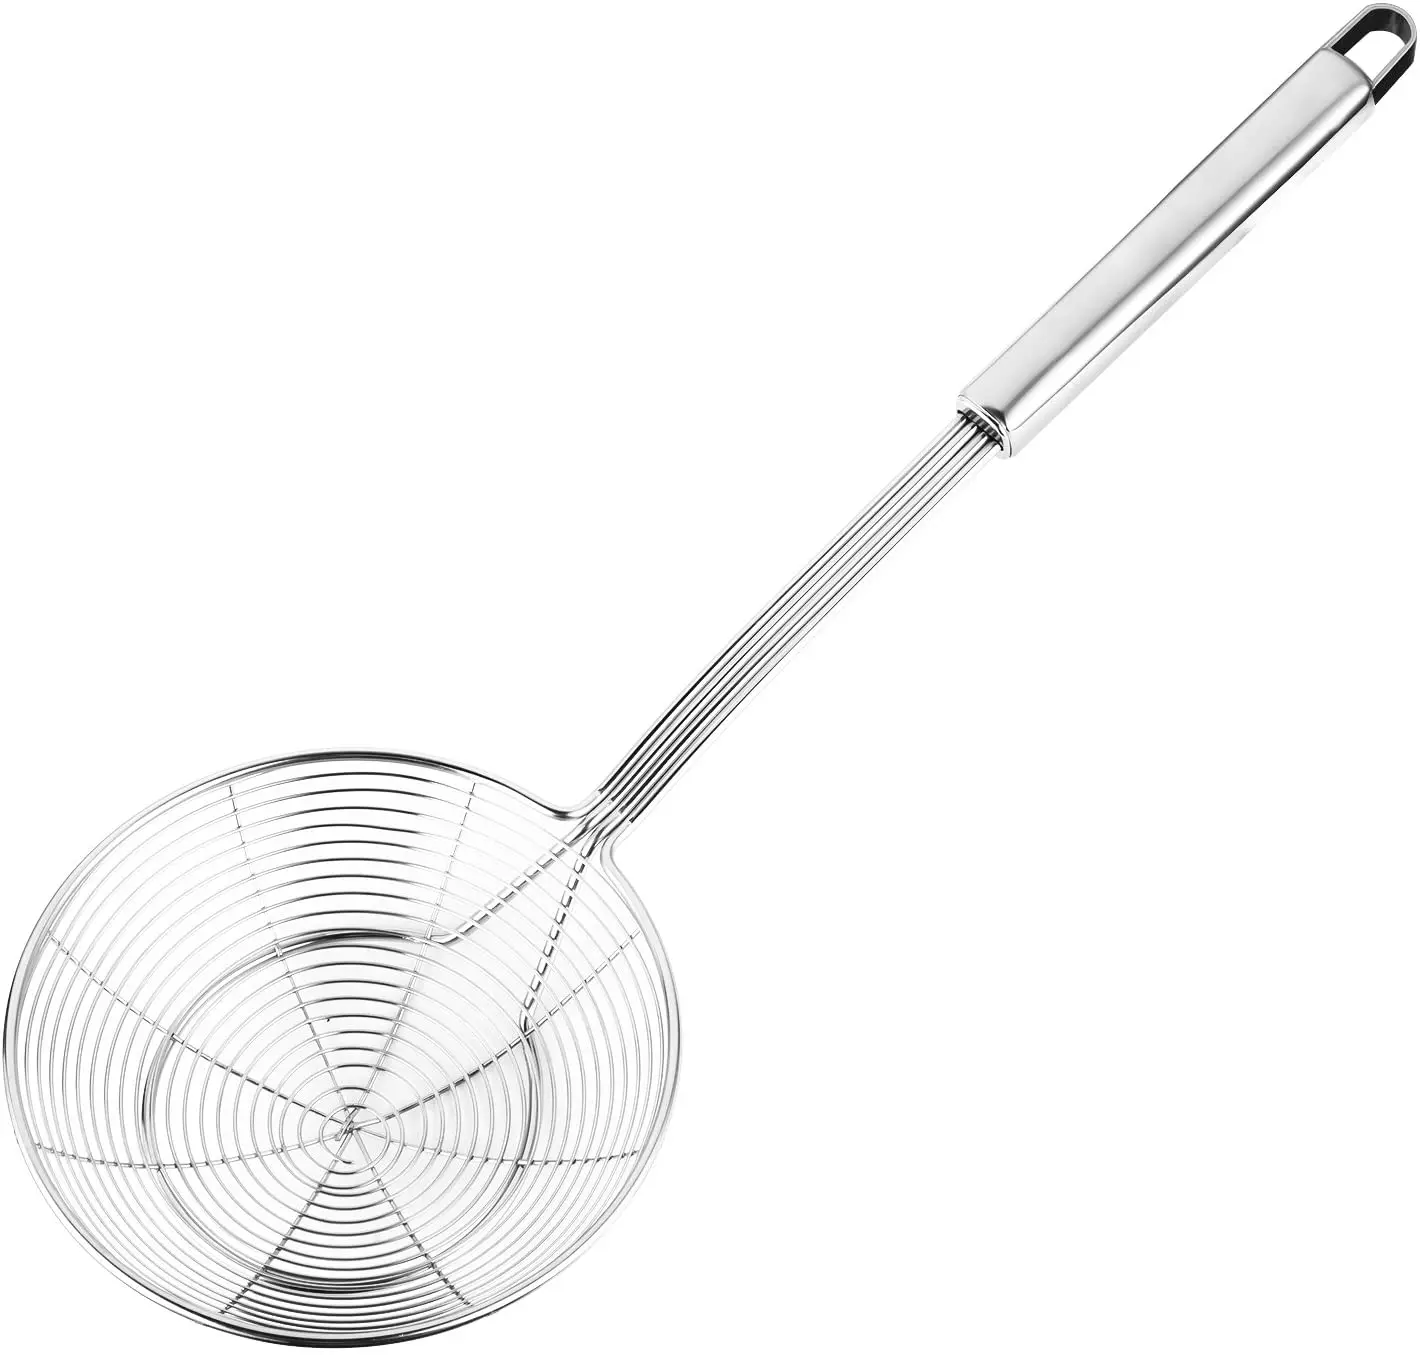 Stainless steel Handle with Hanging Ring Antrader 5.2-Inch Solid Stainless Steel Spider Strainer Wire Skimmer Colander Ladle 